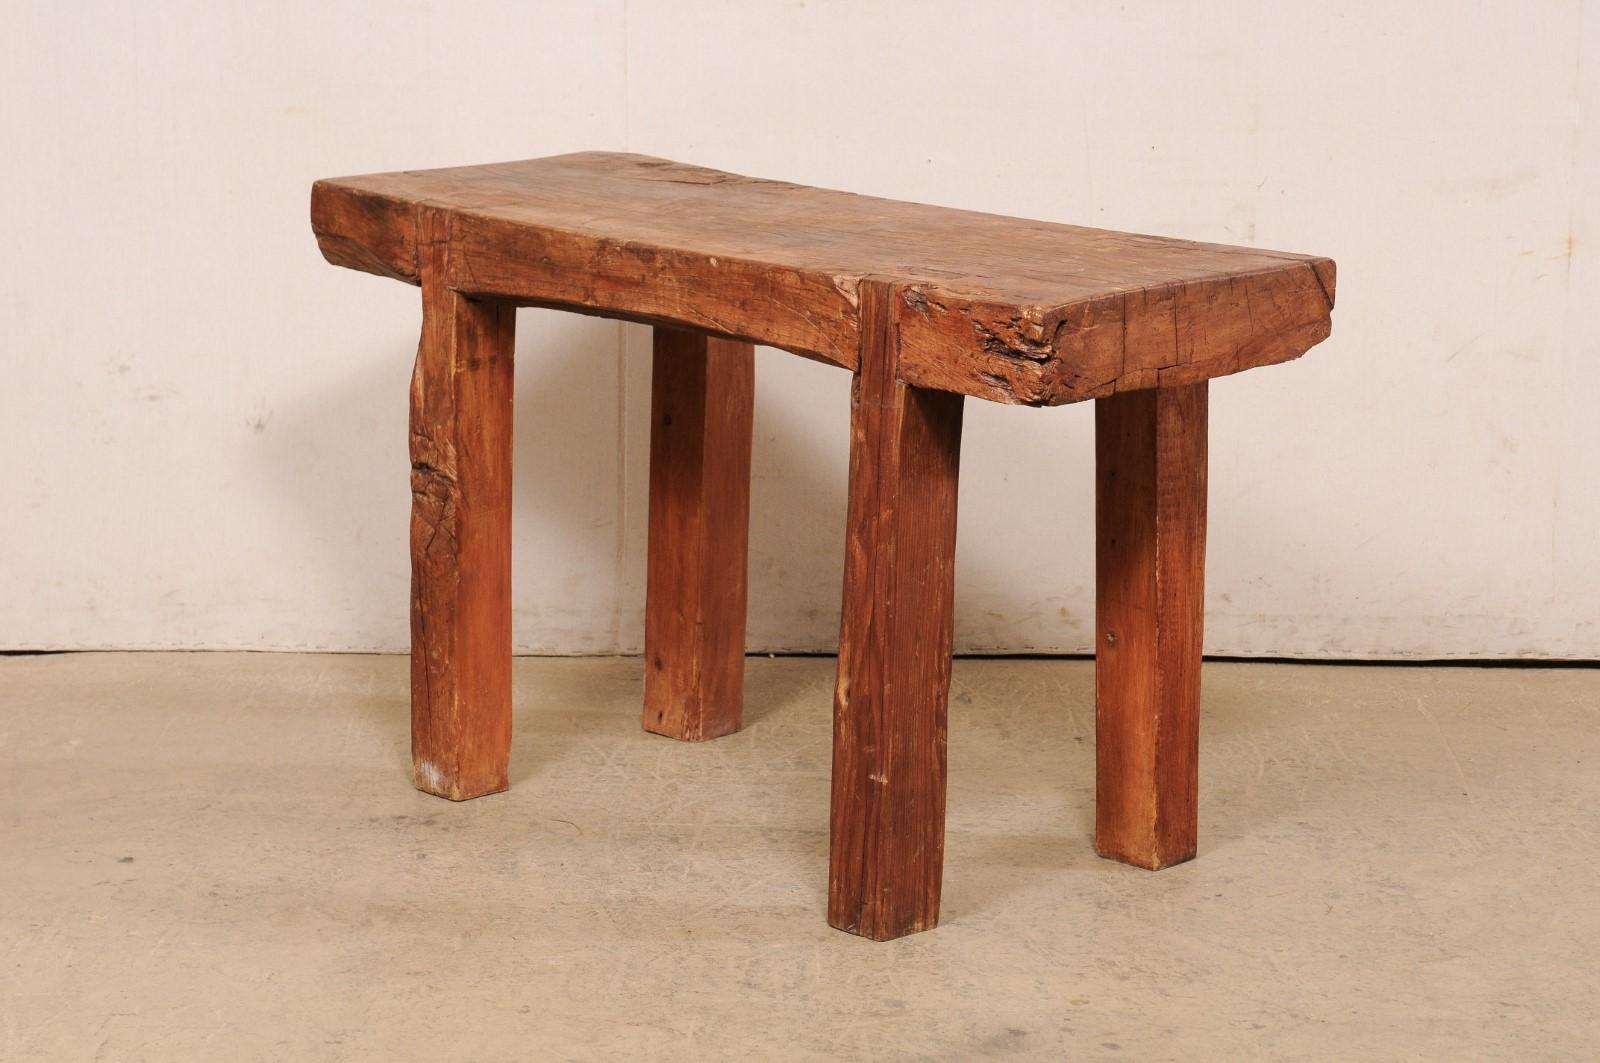 Beautifully Rustic Thick Chopping Block Top Table Would Be a Great Sink Base 3